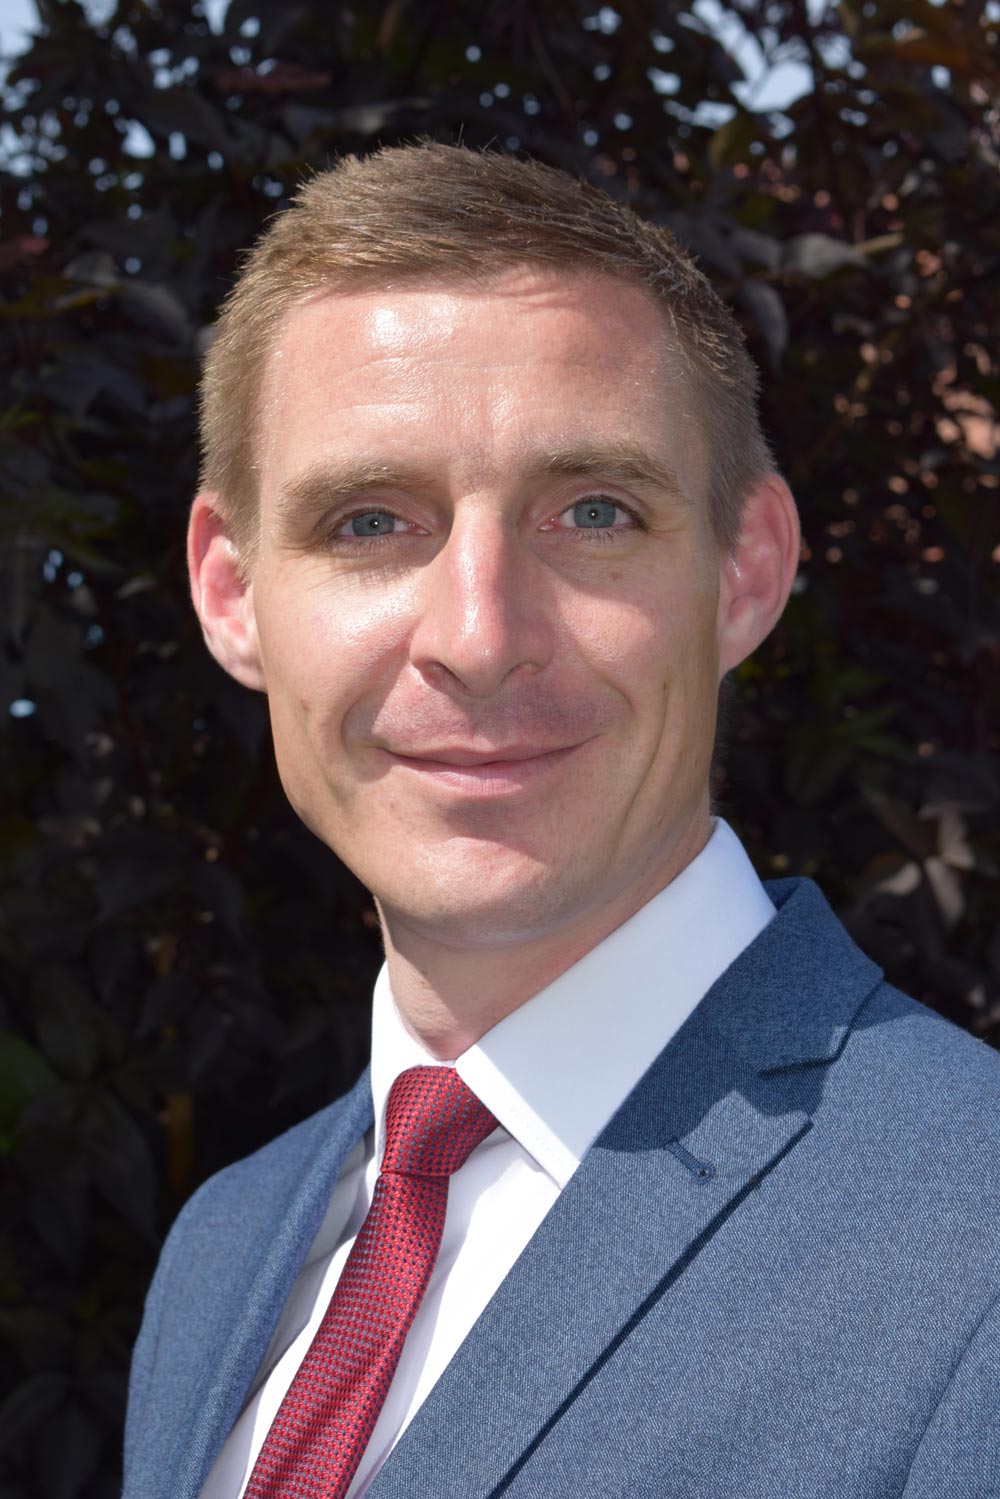 Ben Twitchin has been appointed as Assistant Headteacher and new Director of Sixth Form at Harrogate Grammar School